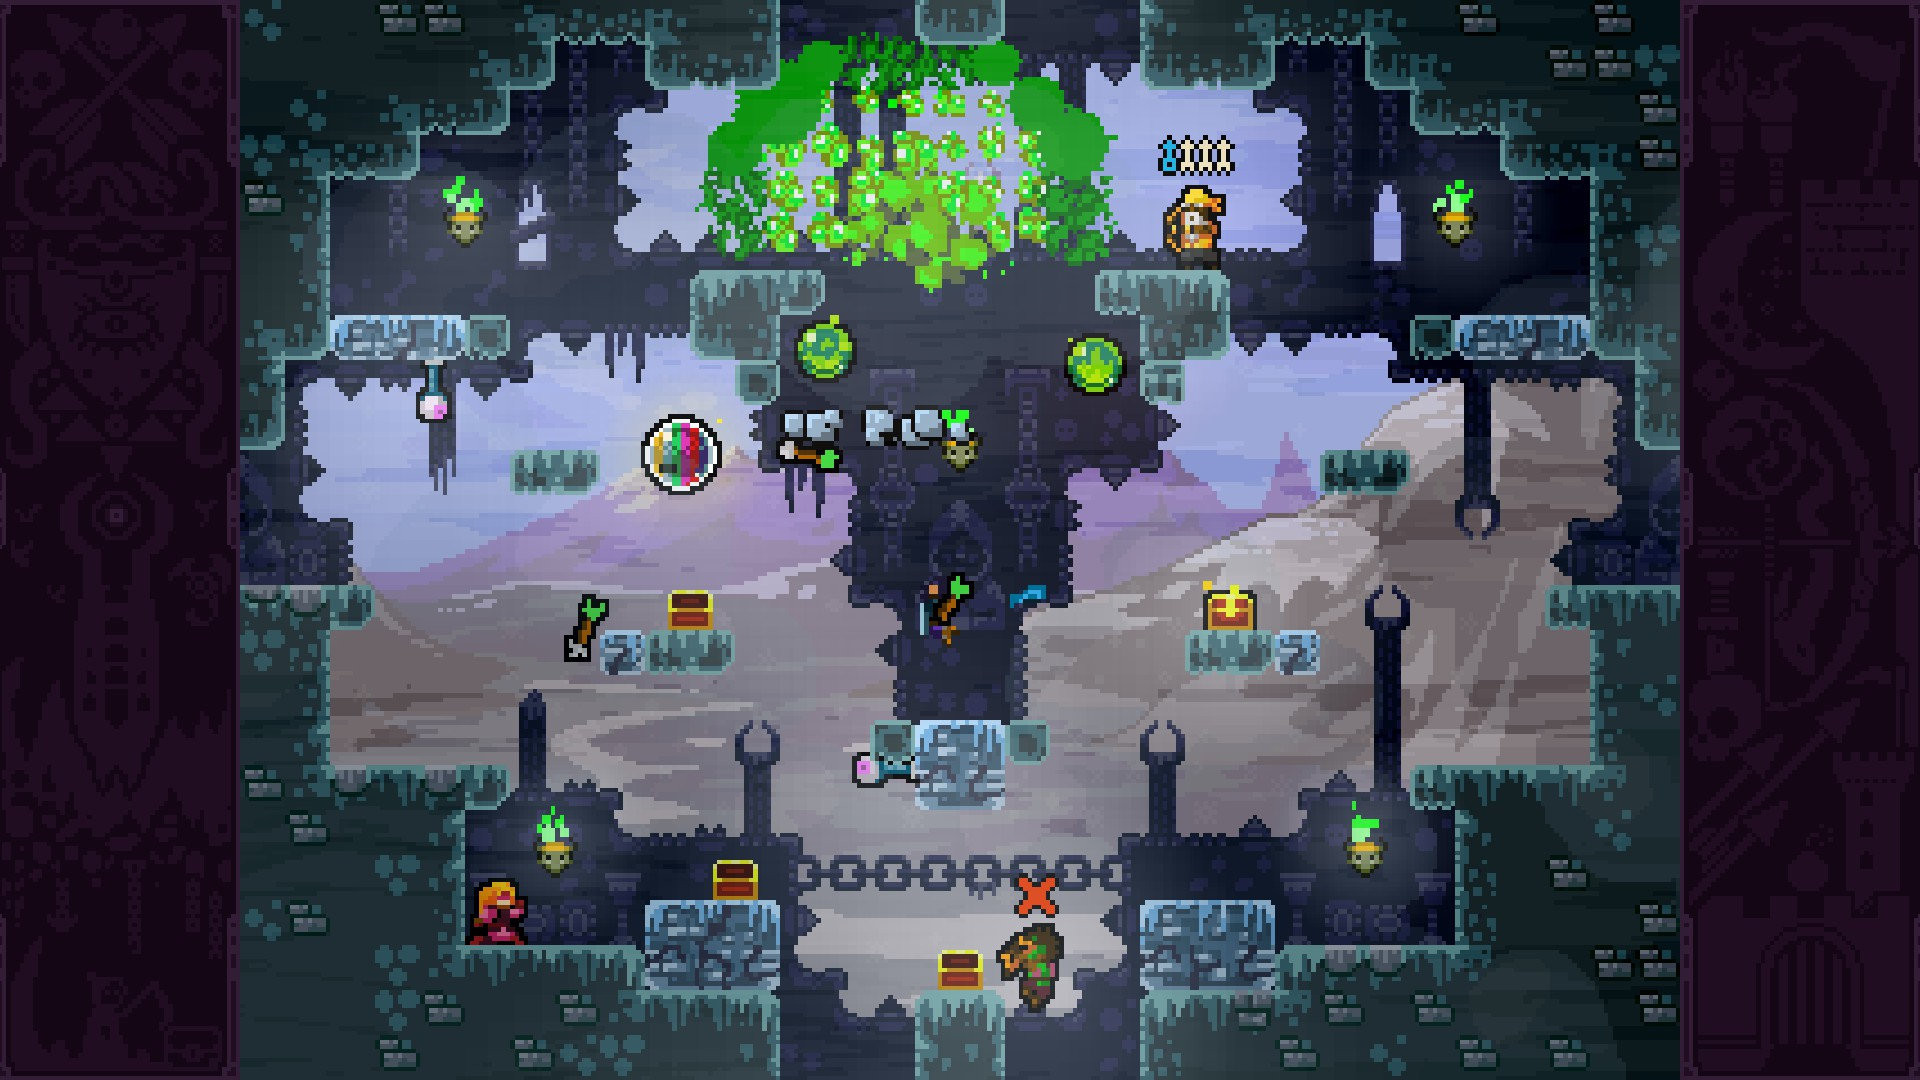 5. TowerFall: Ascension